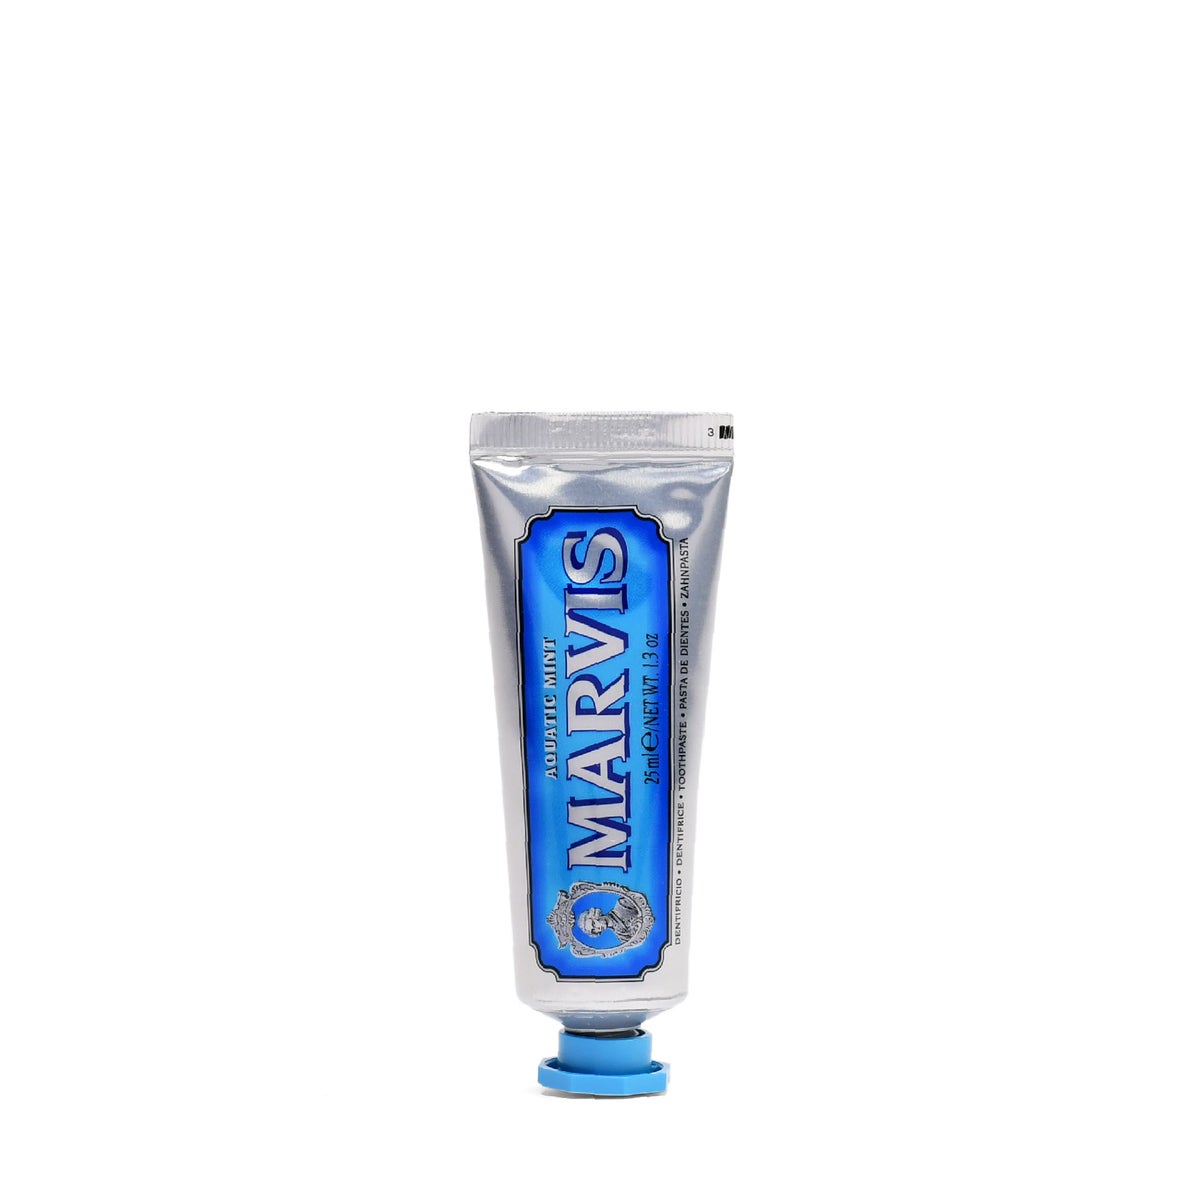 MARVIS - AQUATIC MINT TOOTHPASTE - TRAVEL SIZE